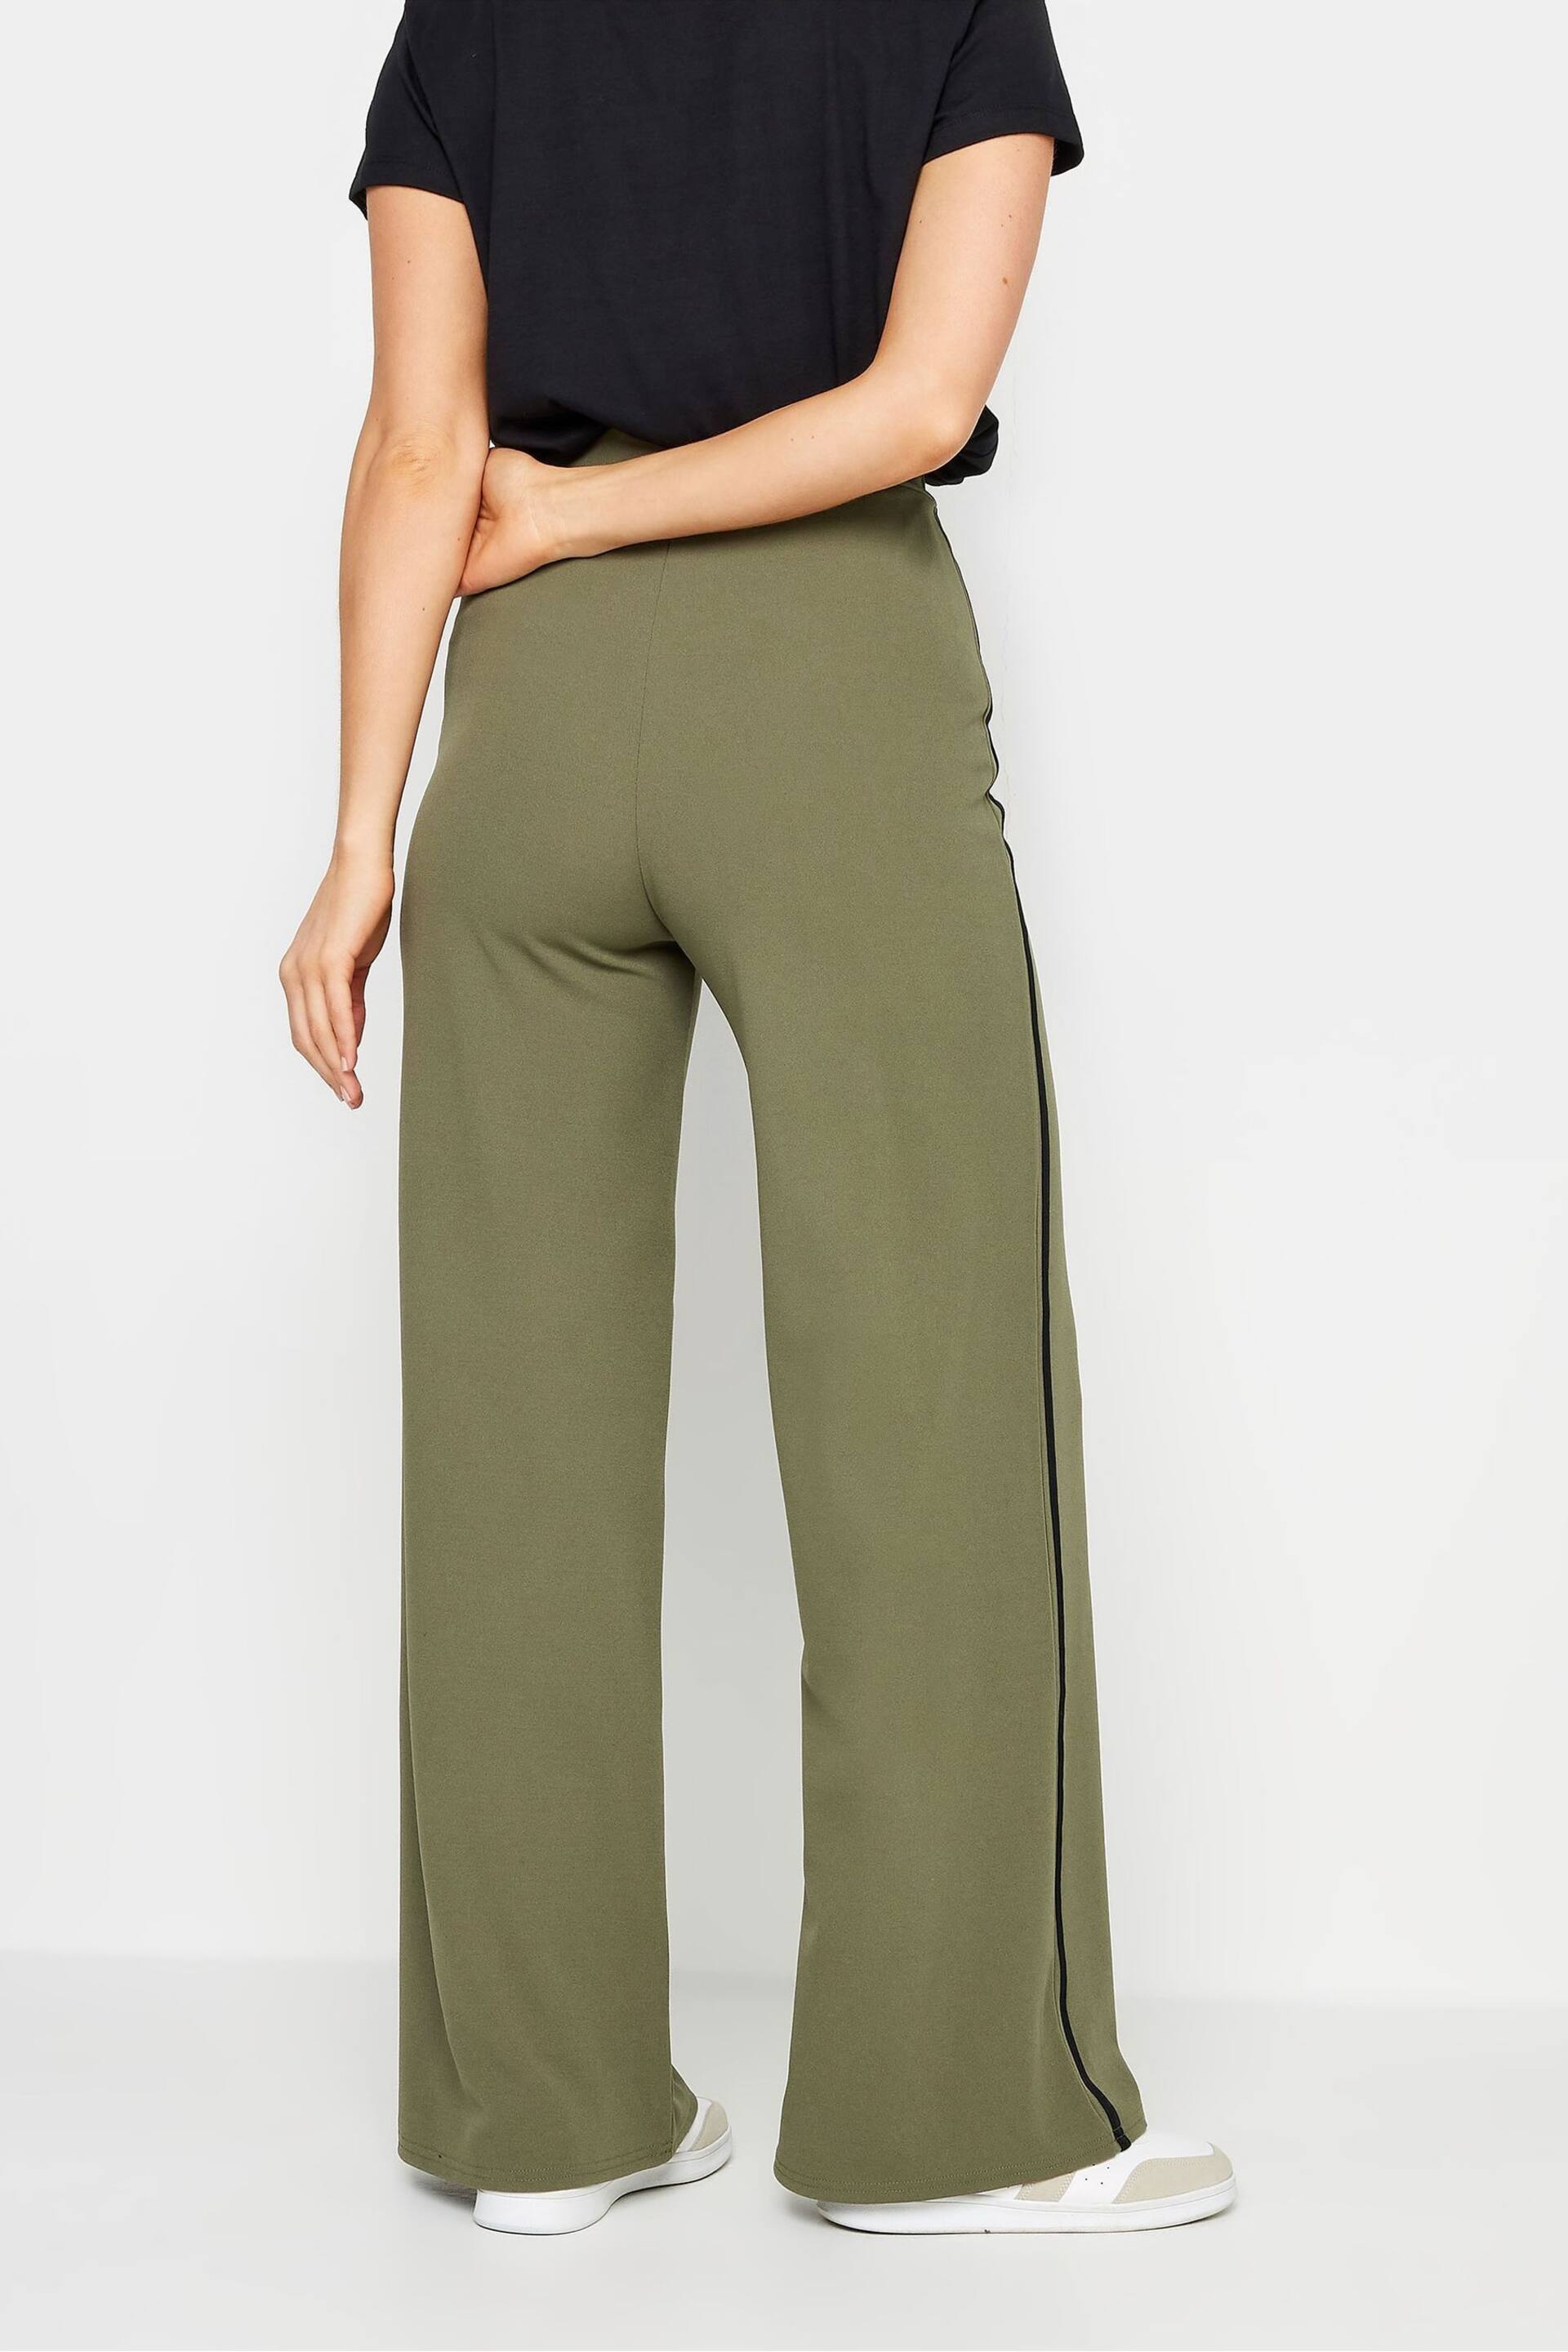 Long Tall Sally Green Side Stripe Wide Leg Trousers - Image 3 of 5